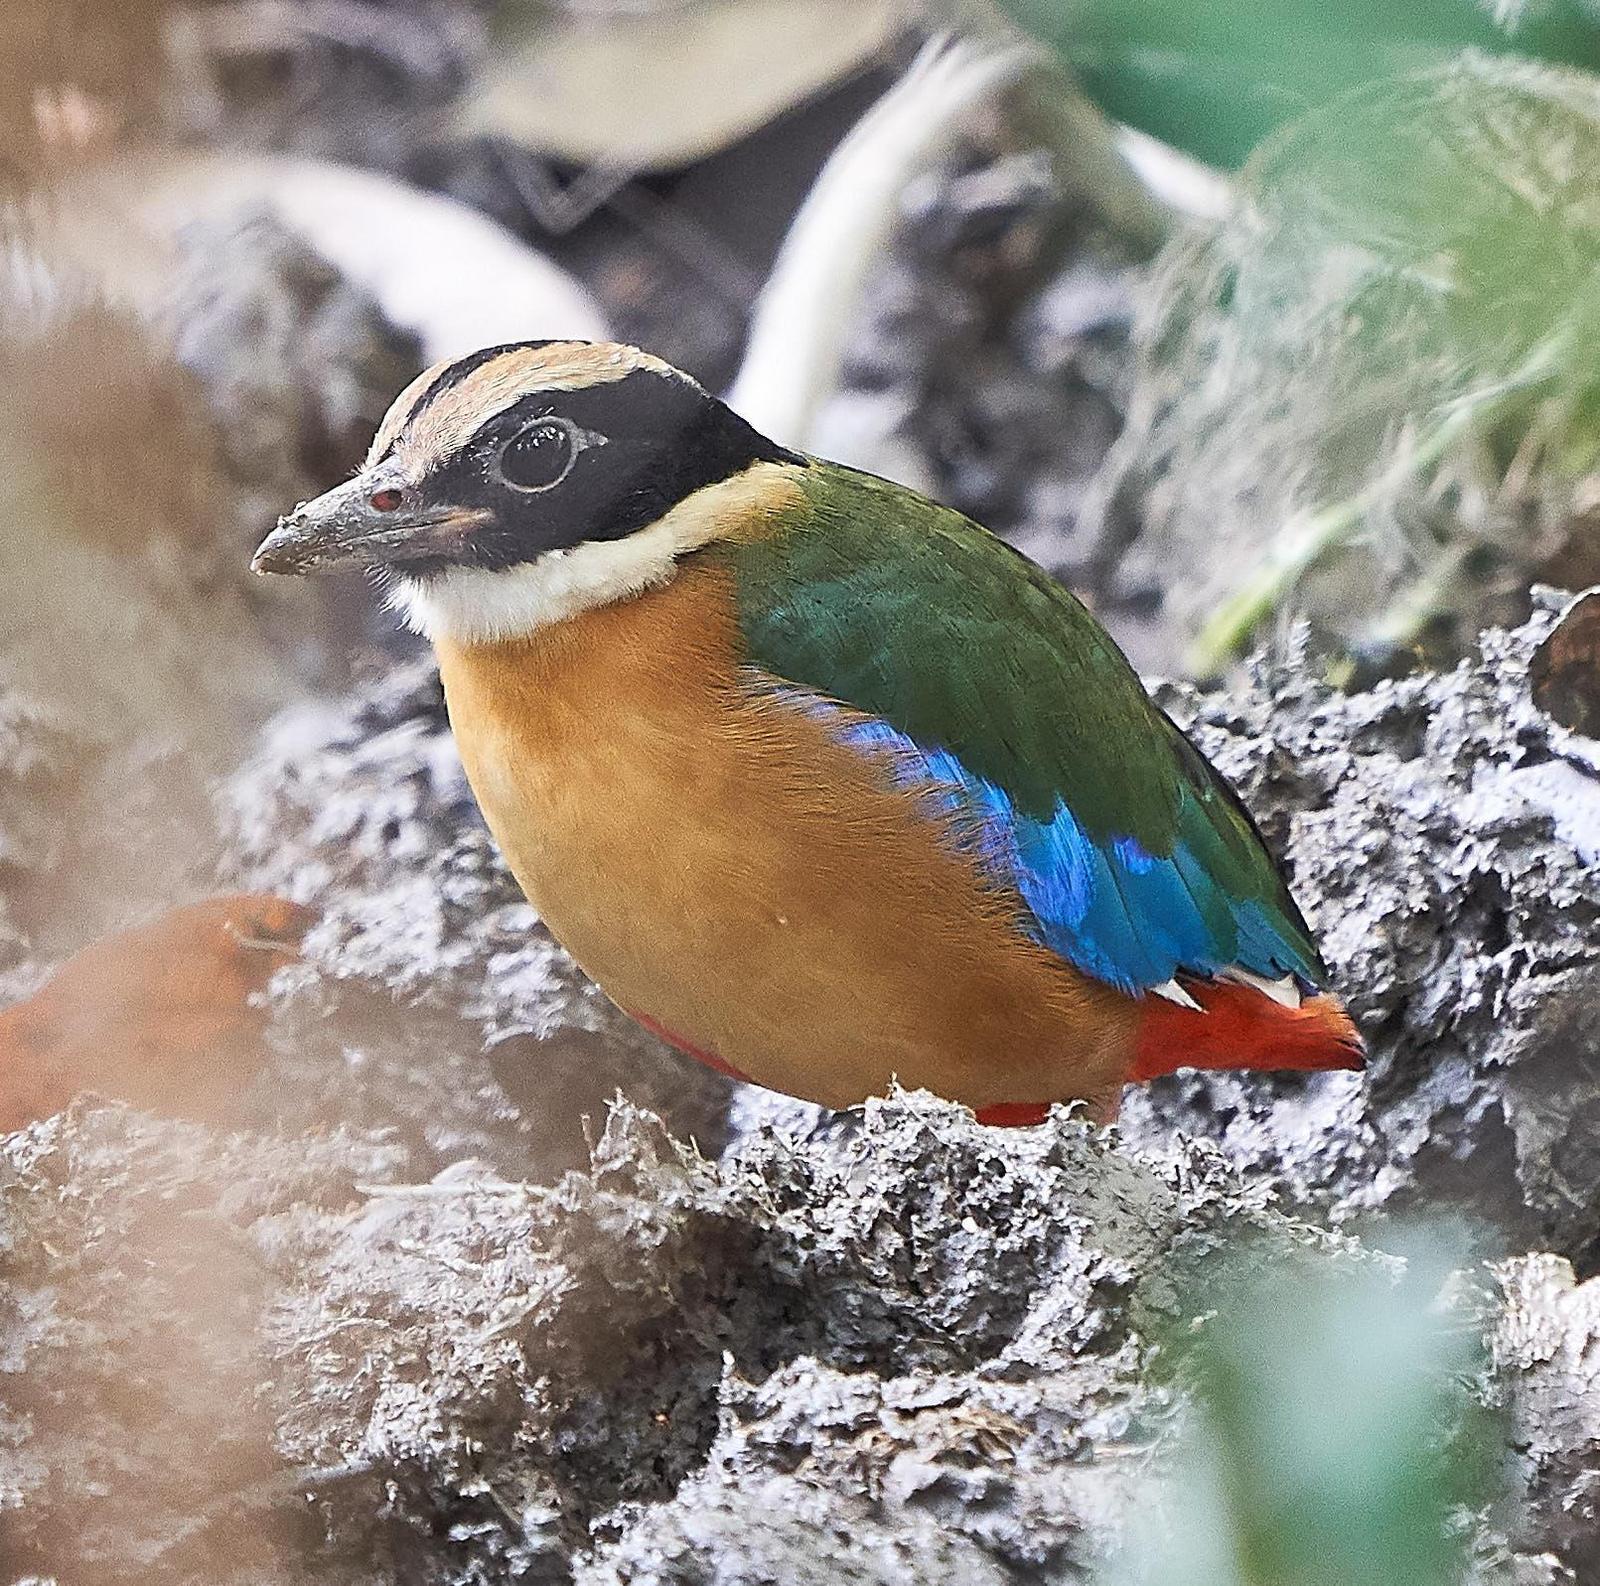 Blue-winged Pitta Photo by Steven Cheong